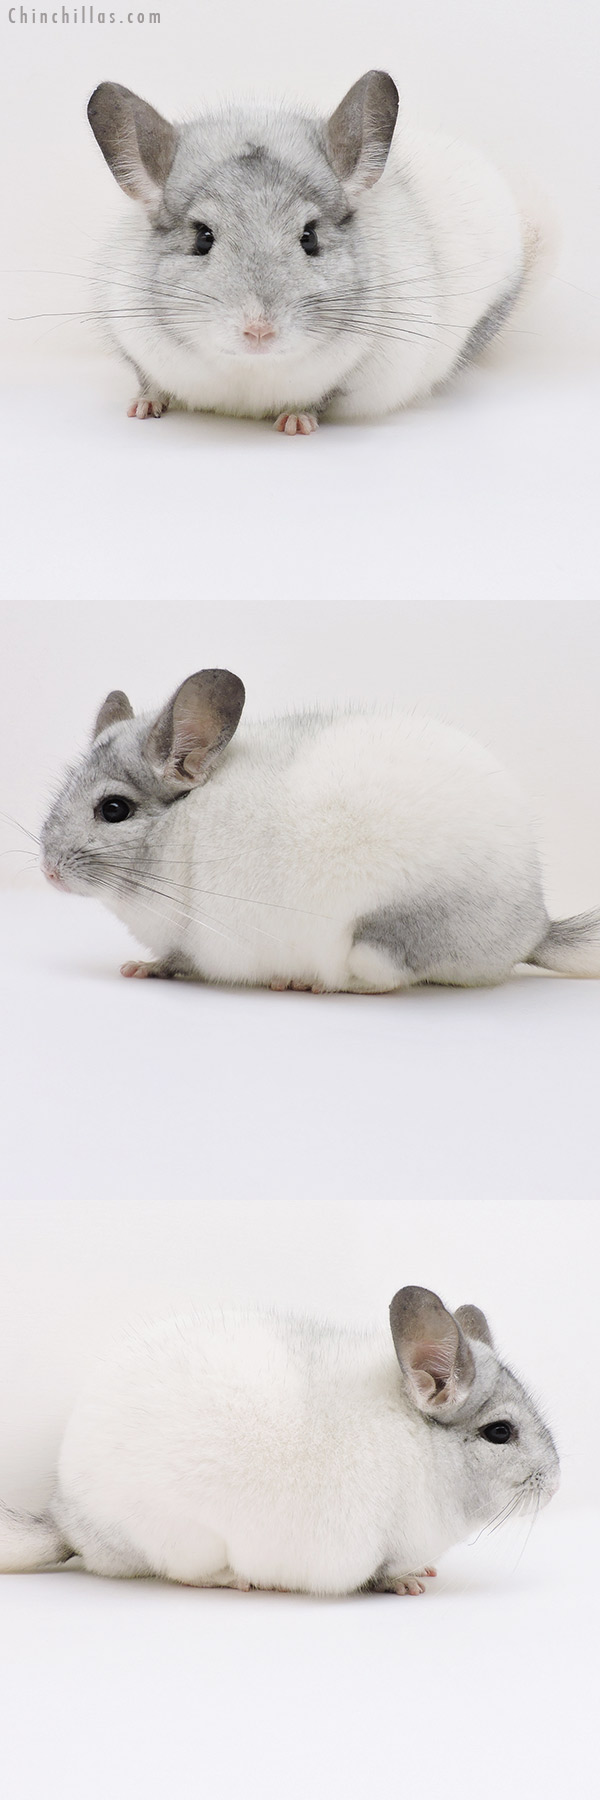 Chinchilla or related item offered for sale or export on Chinchillas.com - 17054 Blocky Show Quality White Mosaic Male Chinchilla